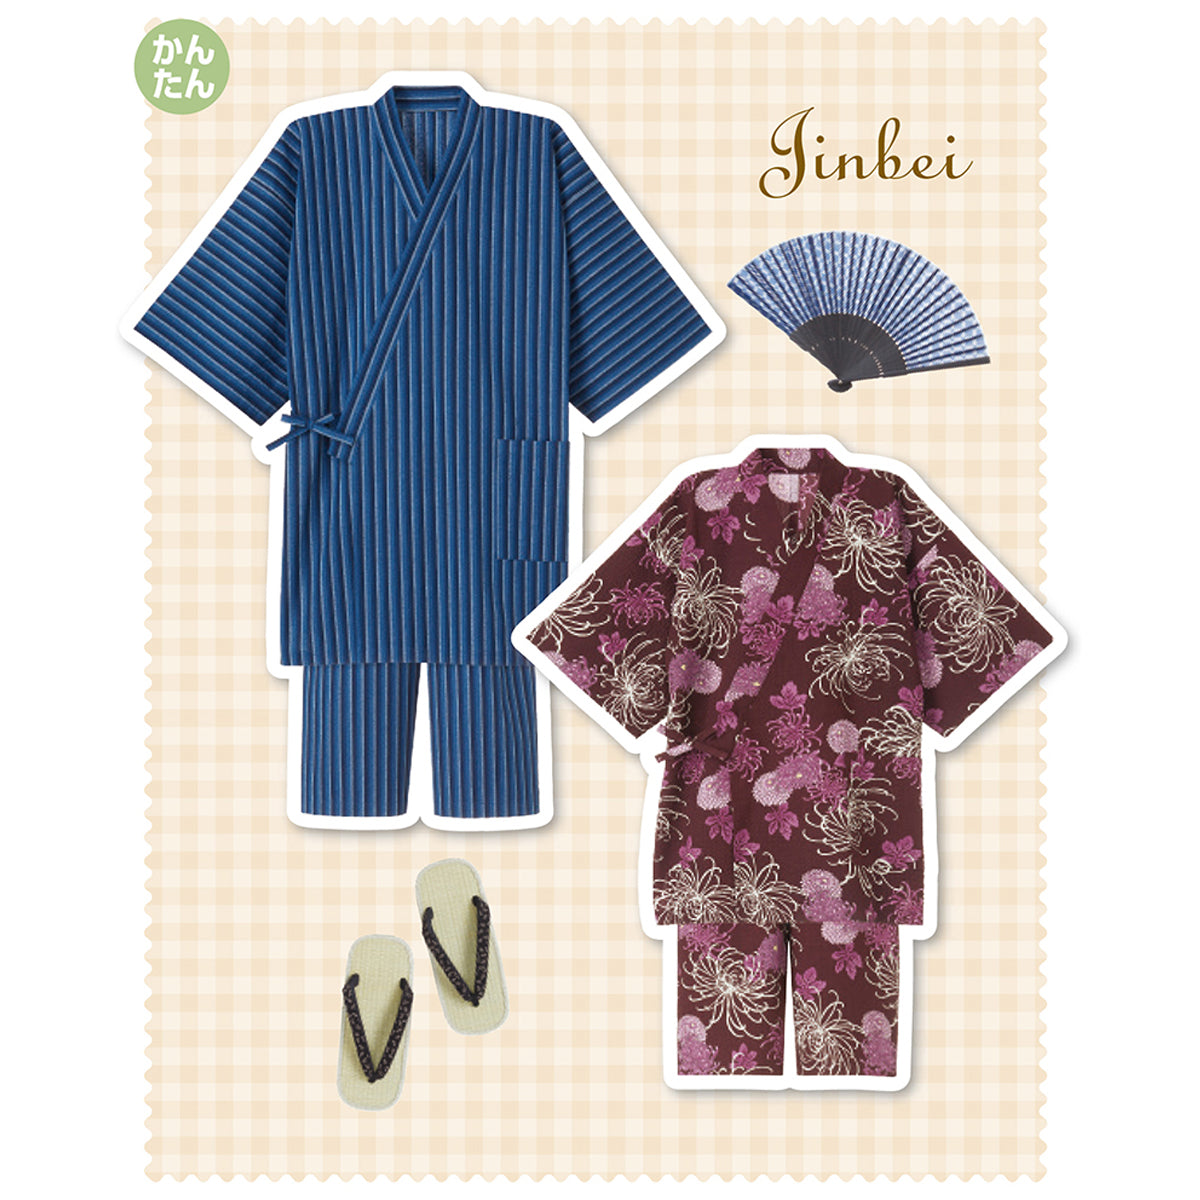 ADULT Jinbei Jacket Paper Pattern з”ље№івЂ“ FO:REST Fabric еёѓжЃ©е ‚